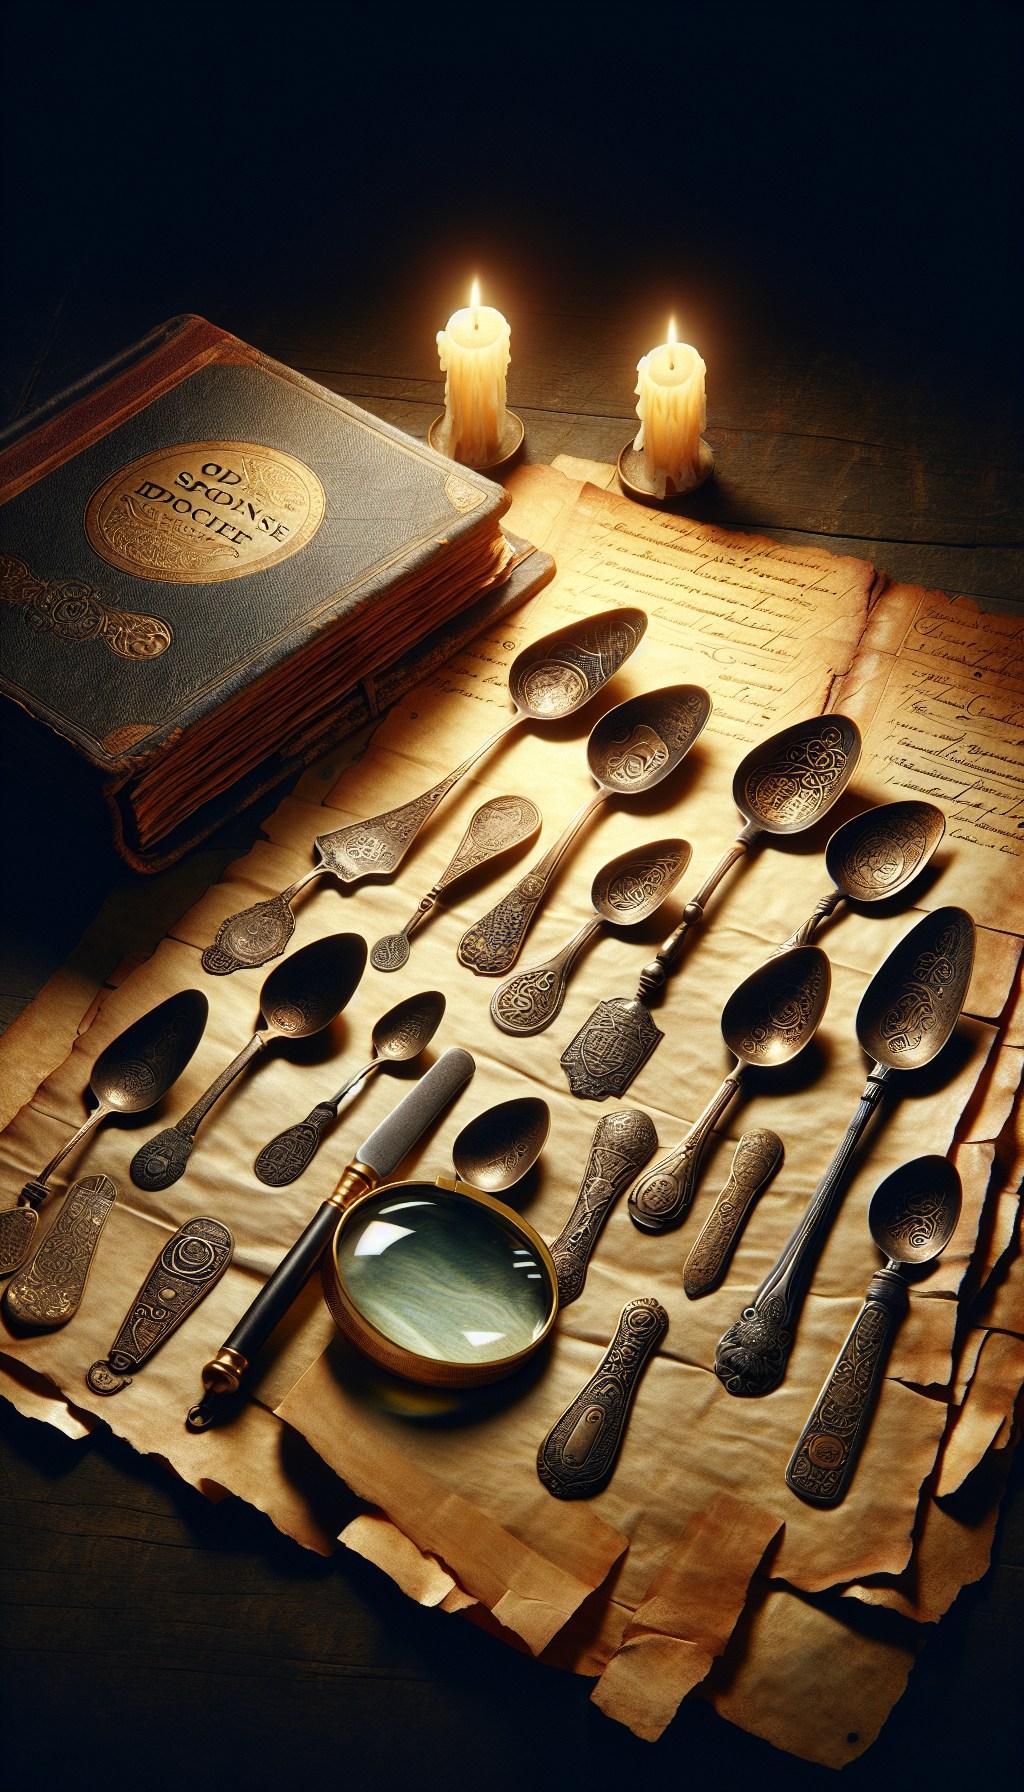 An aged parchment unfurls with an array of ornate antique spoons, each engraved with cryptic hallmarks glinting in candlelight. A magnifying glass hovers over, revealing the intricate symbols to a curious eye, while an old, leather-bound tome titled "Old Spoons Identifier" lies open, its pages whispering secrets of provenance and craft.